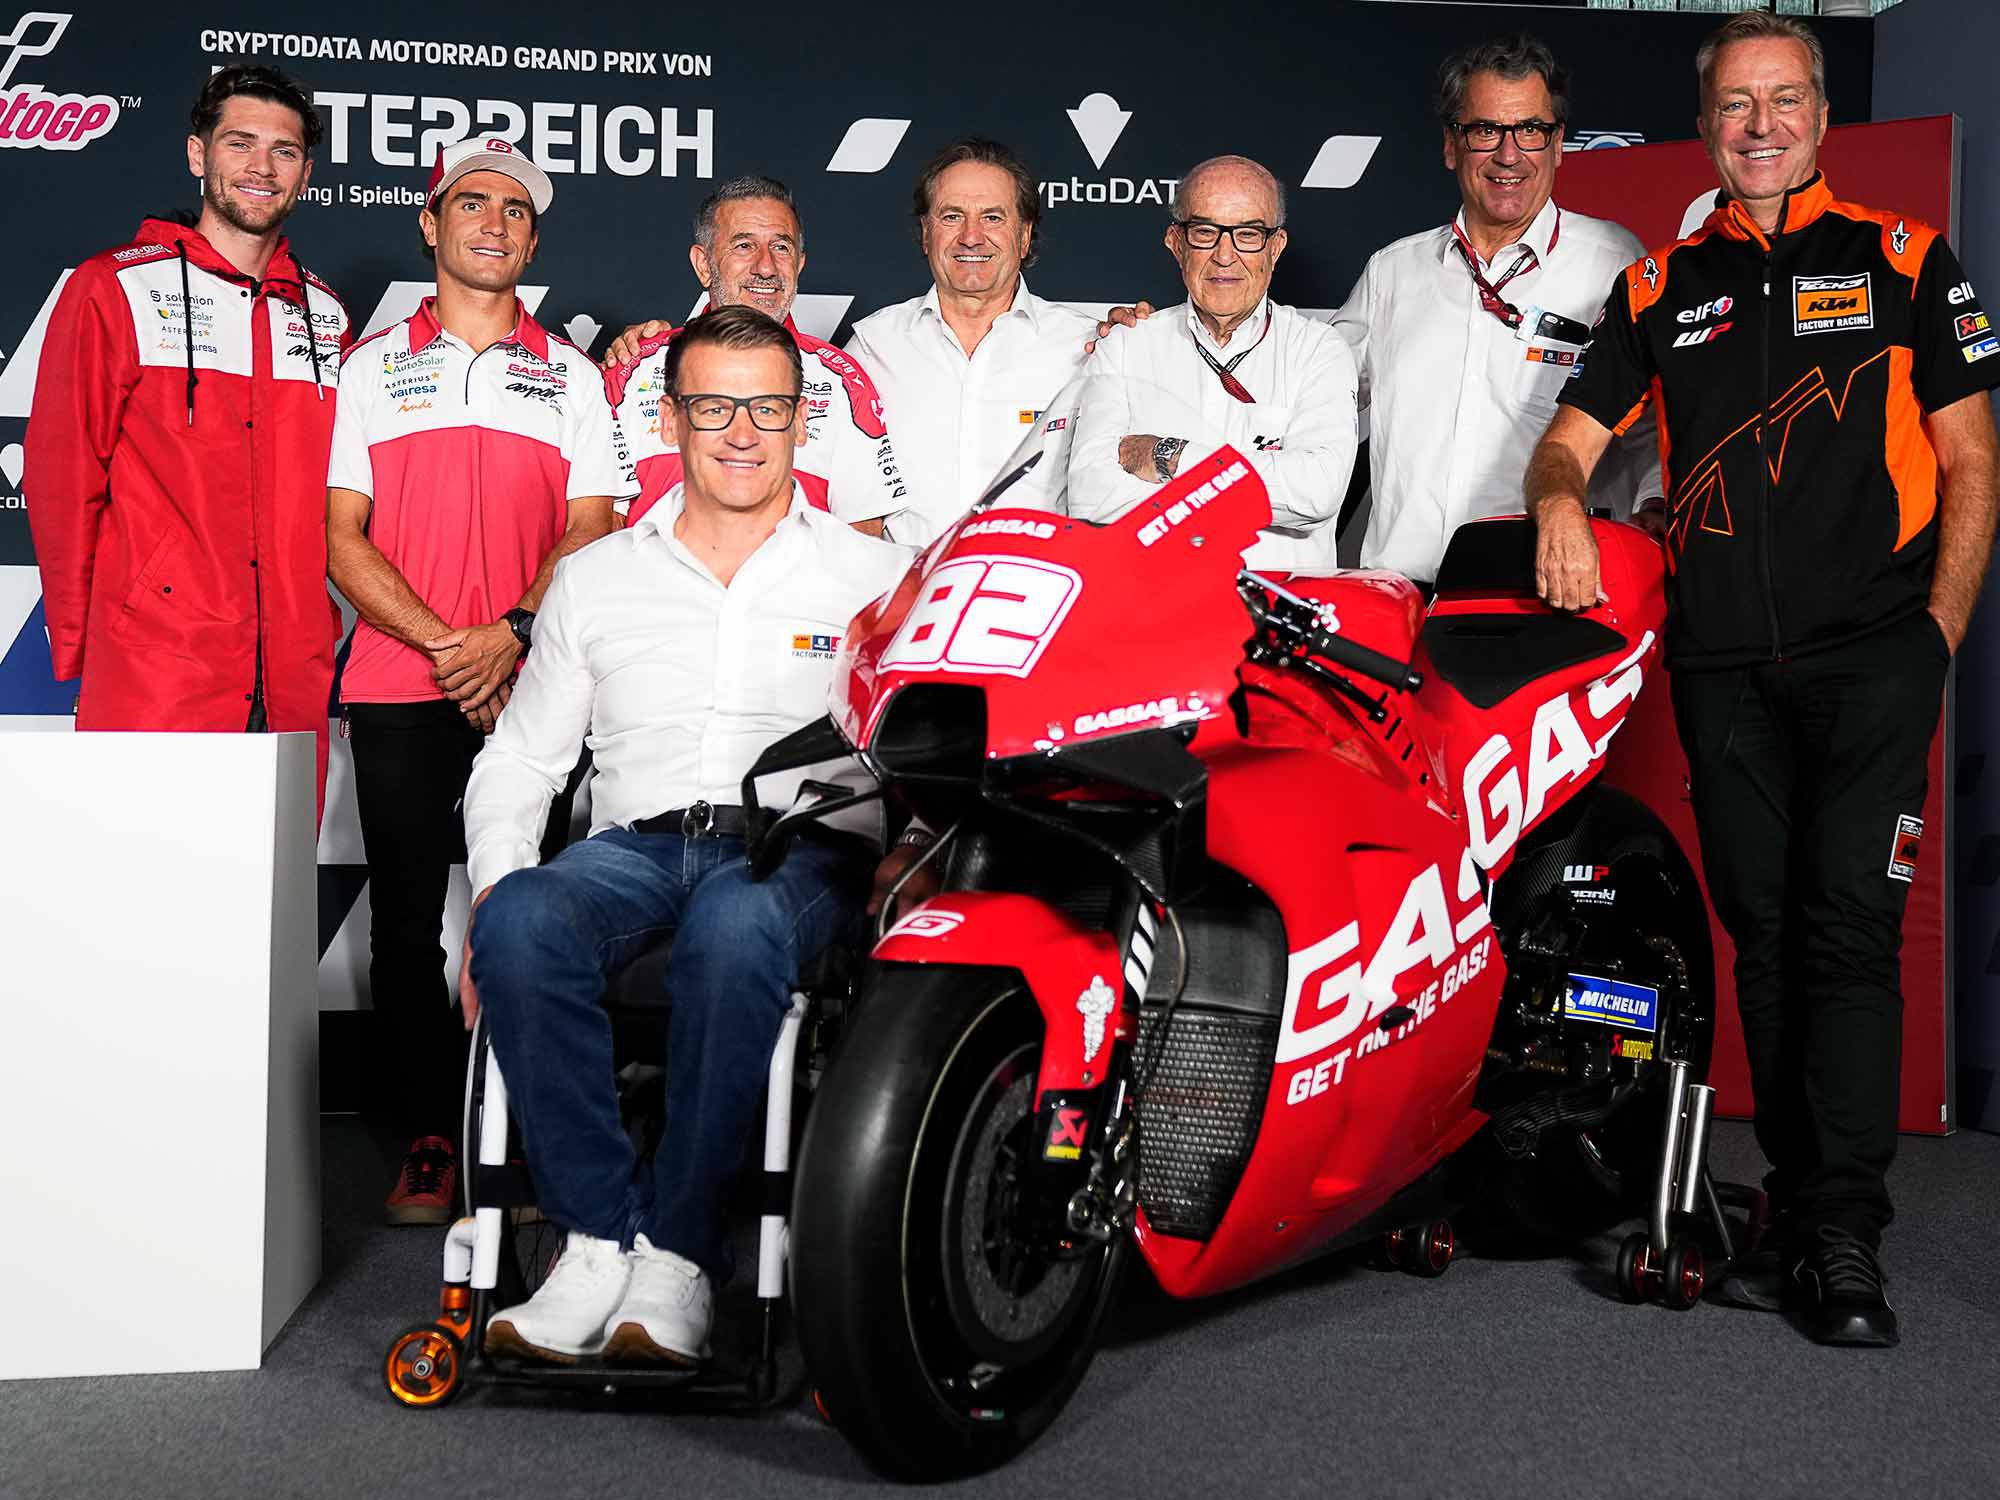 The whole gang was on hand for the GasGas announcement. Left to right: Jake Dixon and Albert Arenas (GasGas Moto2 riders), Pit Beirer, Jorge Martínez, Hubert Trunkenpolz, Carmelo Ezpeleta, Stefan Pierer, and Hervé Poncharal.